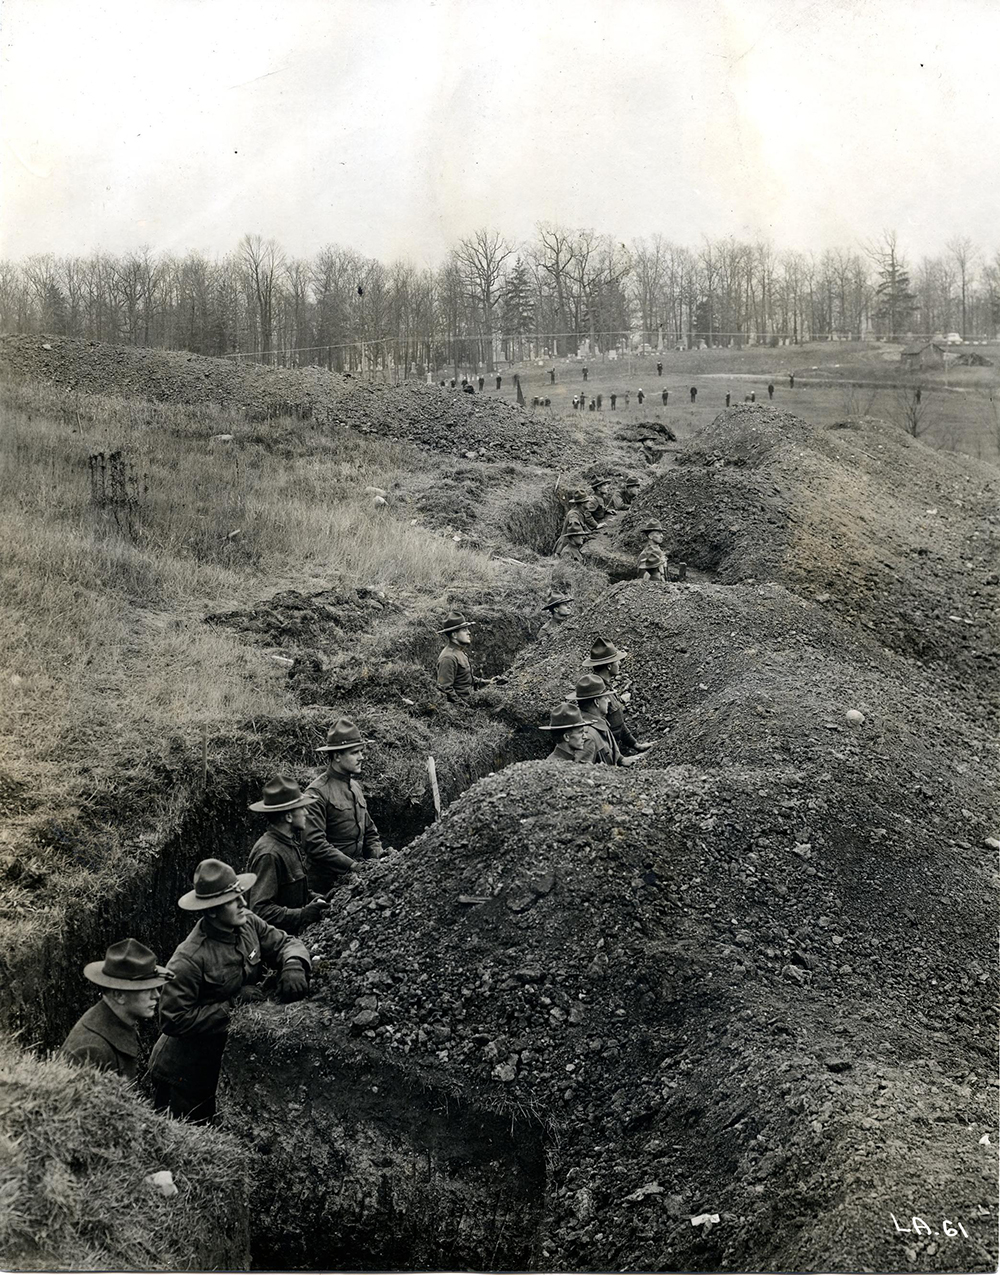 With World War I in progress, U-M students train in makeshift trenches near Ann Arbor’s Forest Hill Cemetery. For more information on how the Great War affected campus, read “For the Use of the Nation” in the winter 2018 issue of Michigan Alumnus.